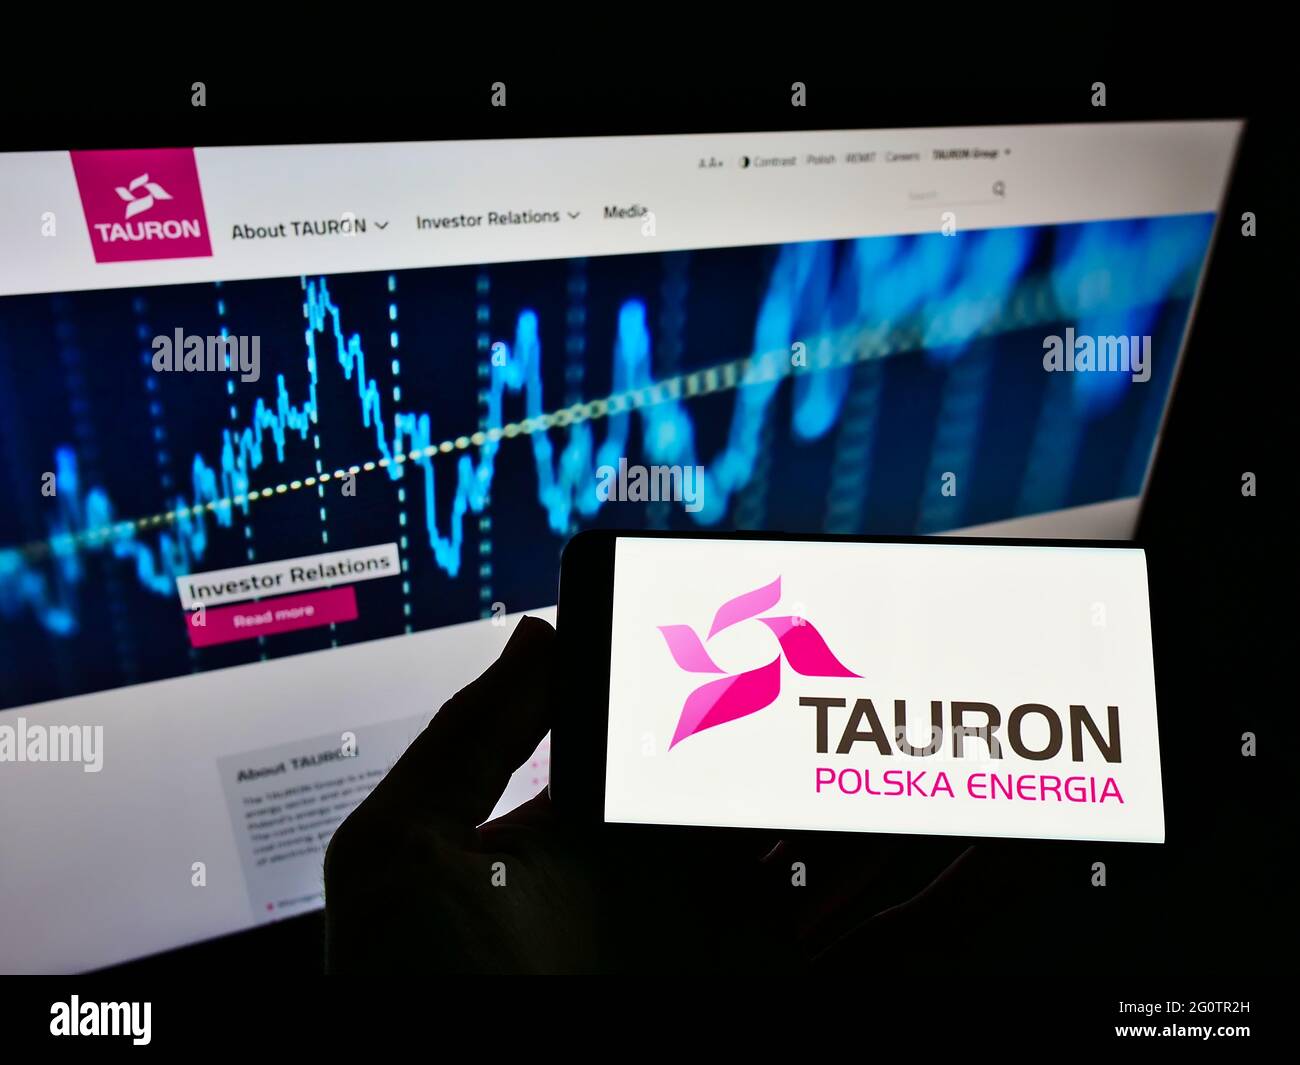 Person holding mobile phone with logo of Polish energy company Tauron Polska Energia SA on screen in front of web page. Focus on phone display. Stock Photo